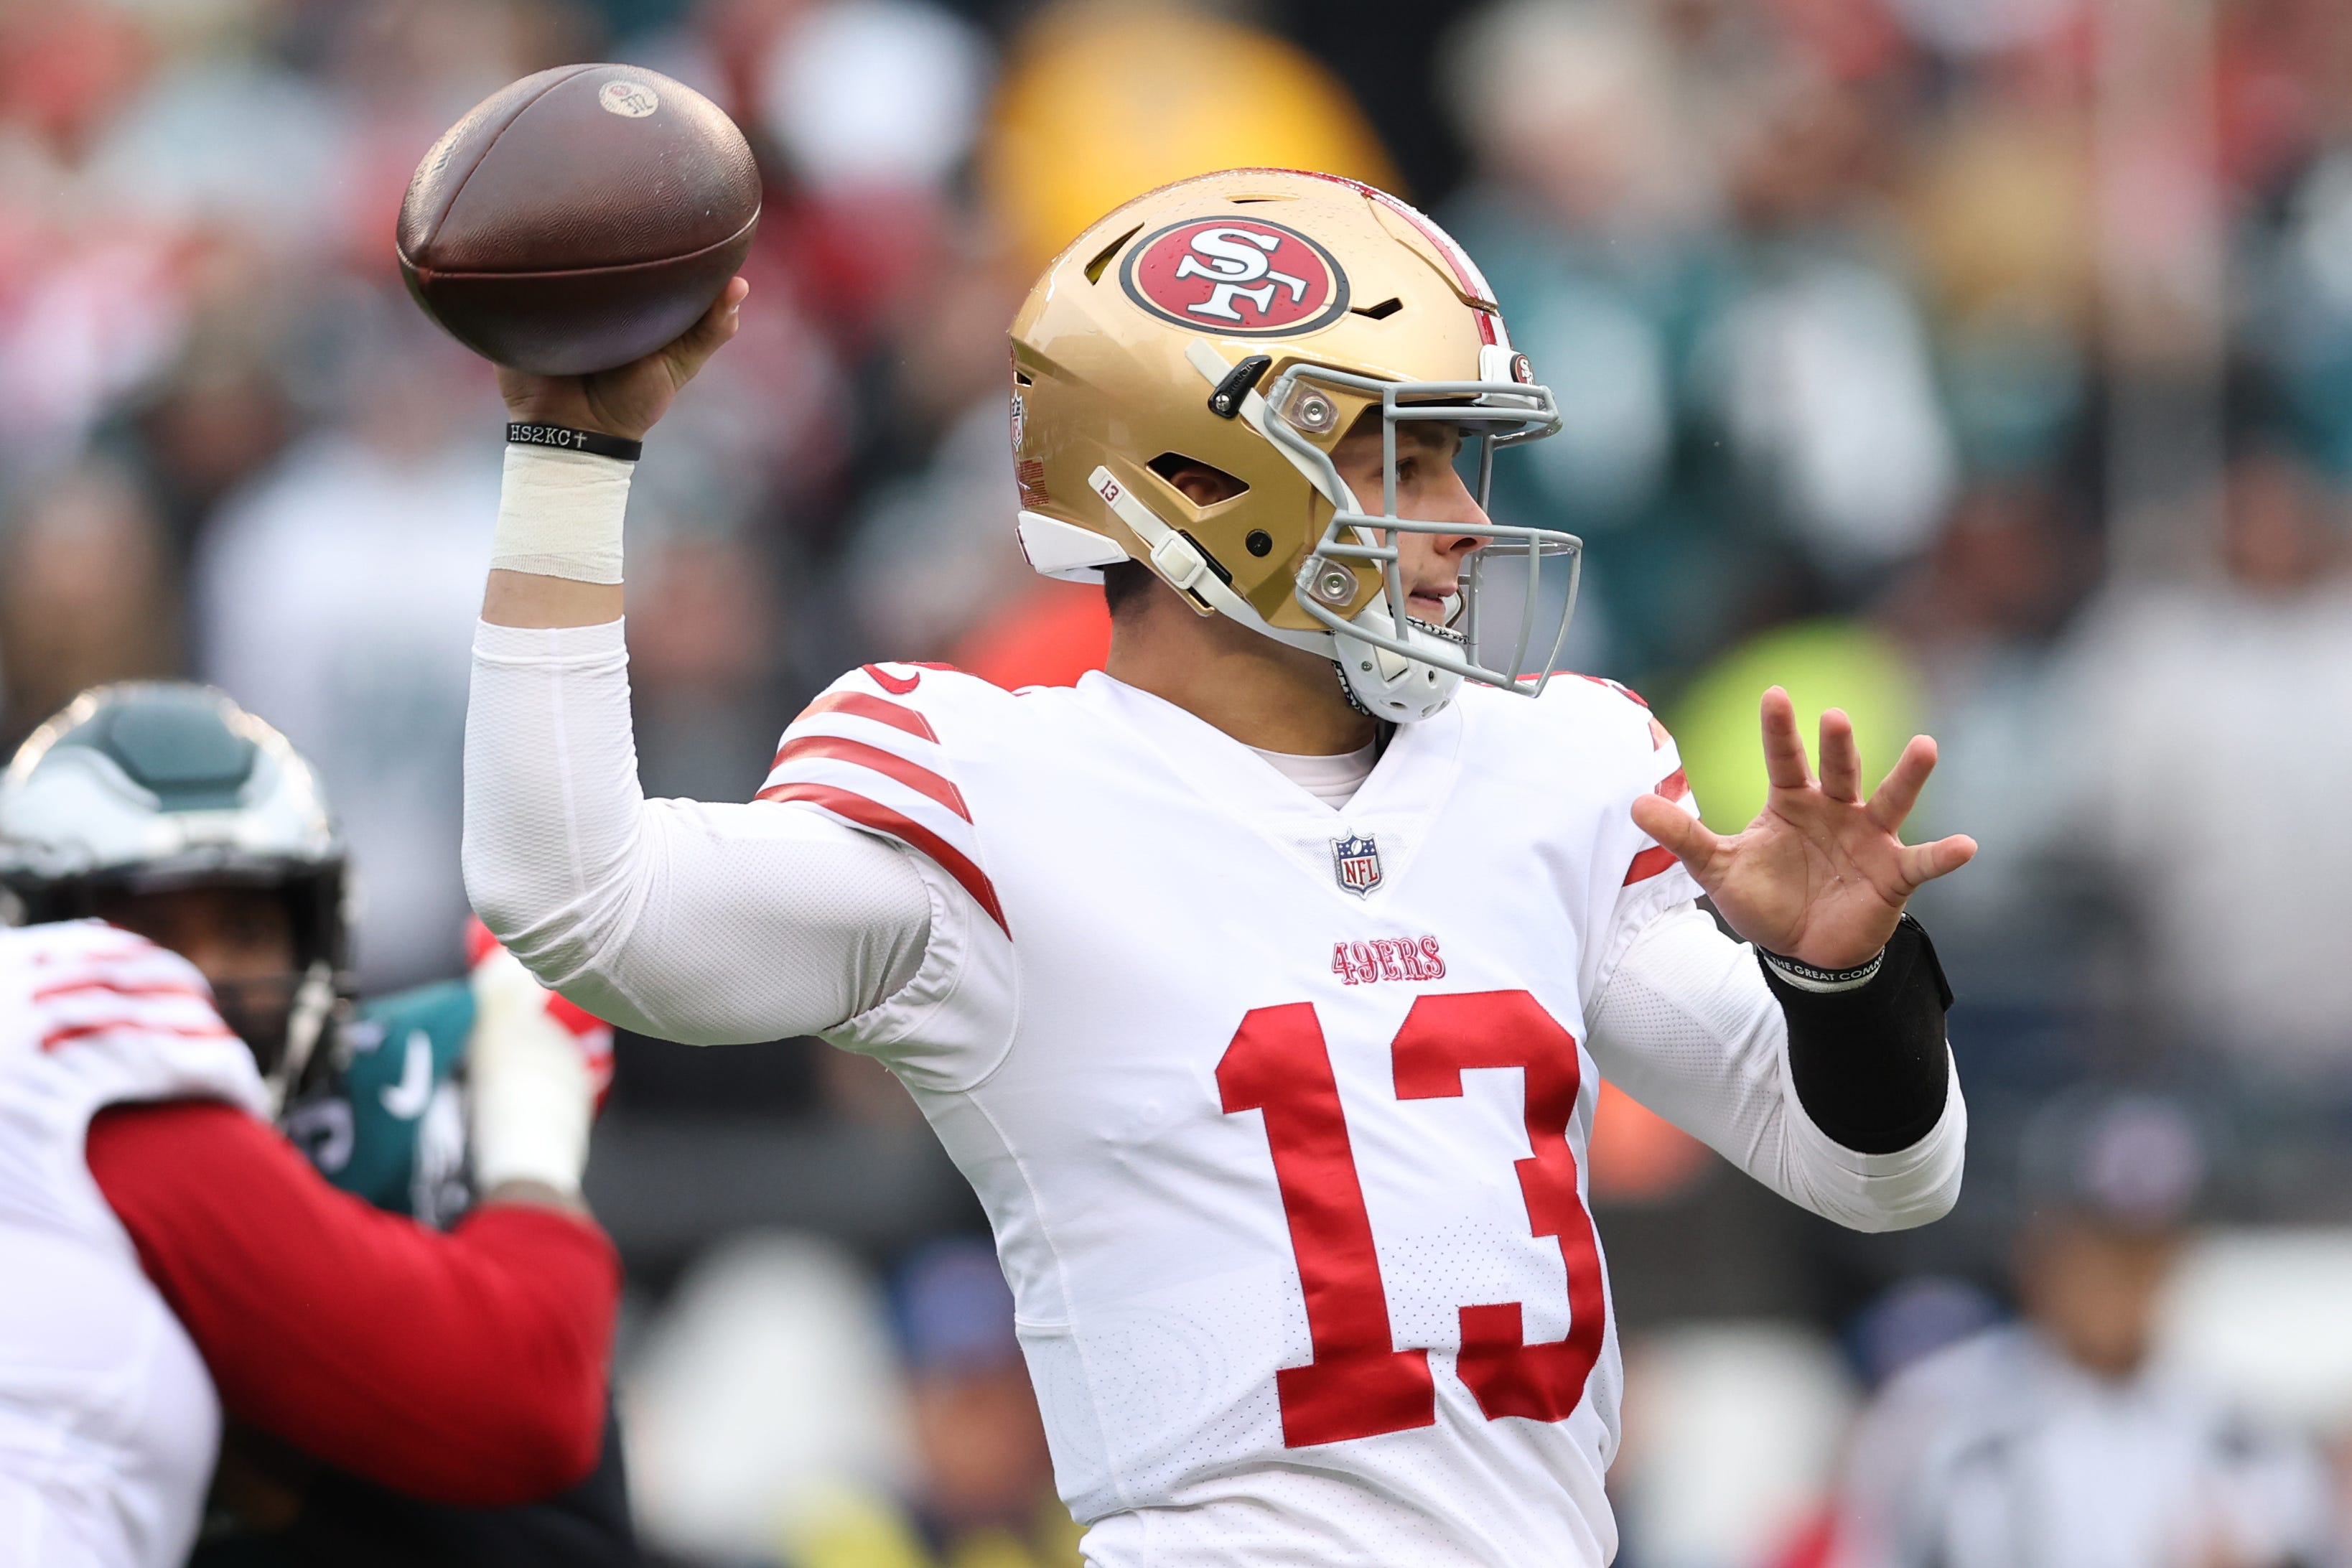 49ers' season unravels after Brock Purdy's injury, dilemma awaits on team's QB future  | Opinion